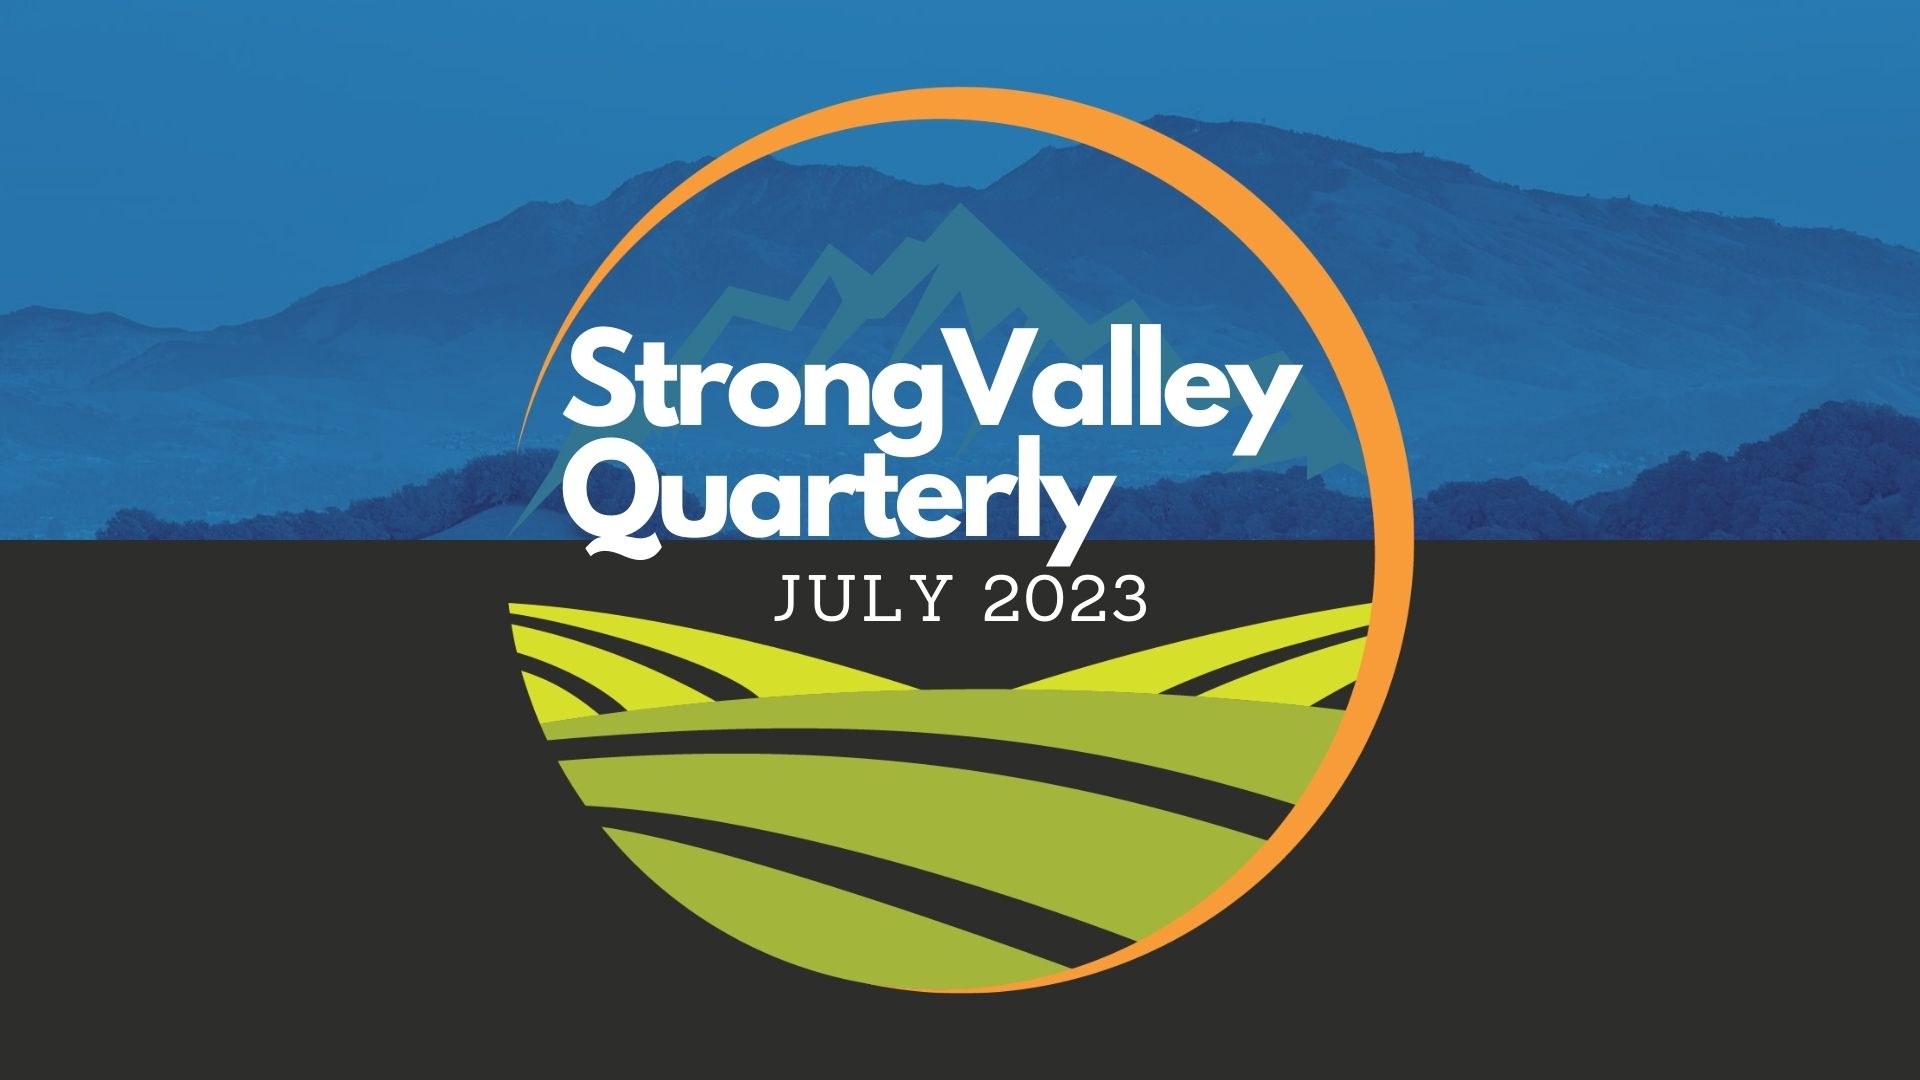 Strong Valley Quarterly Updates